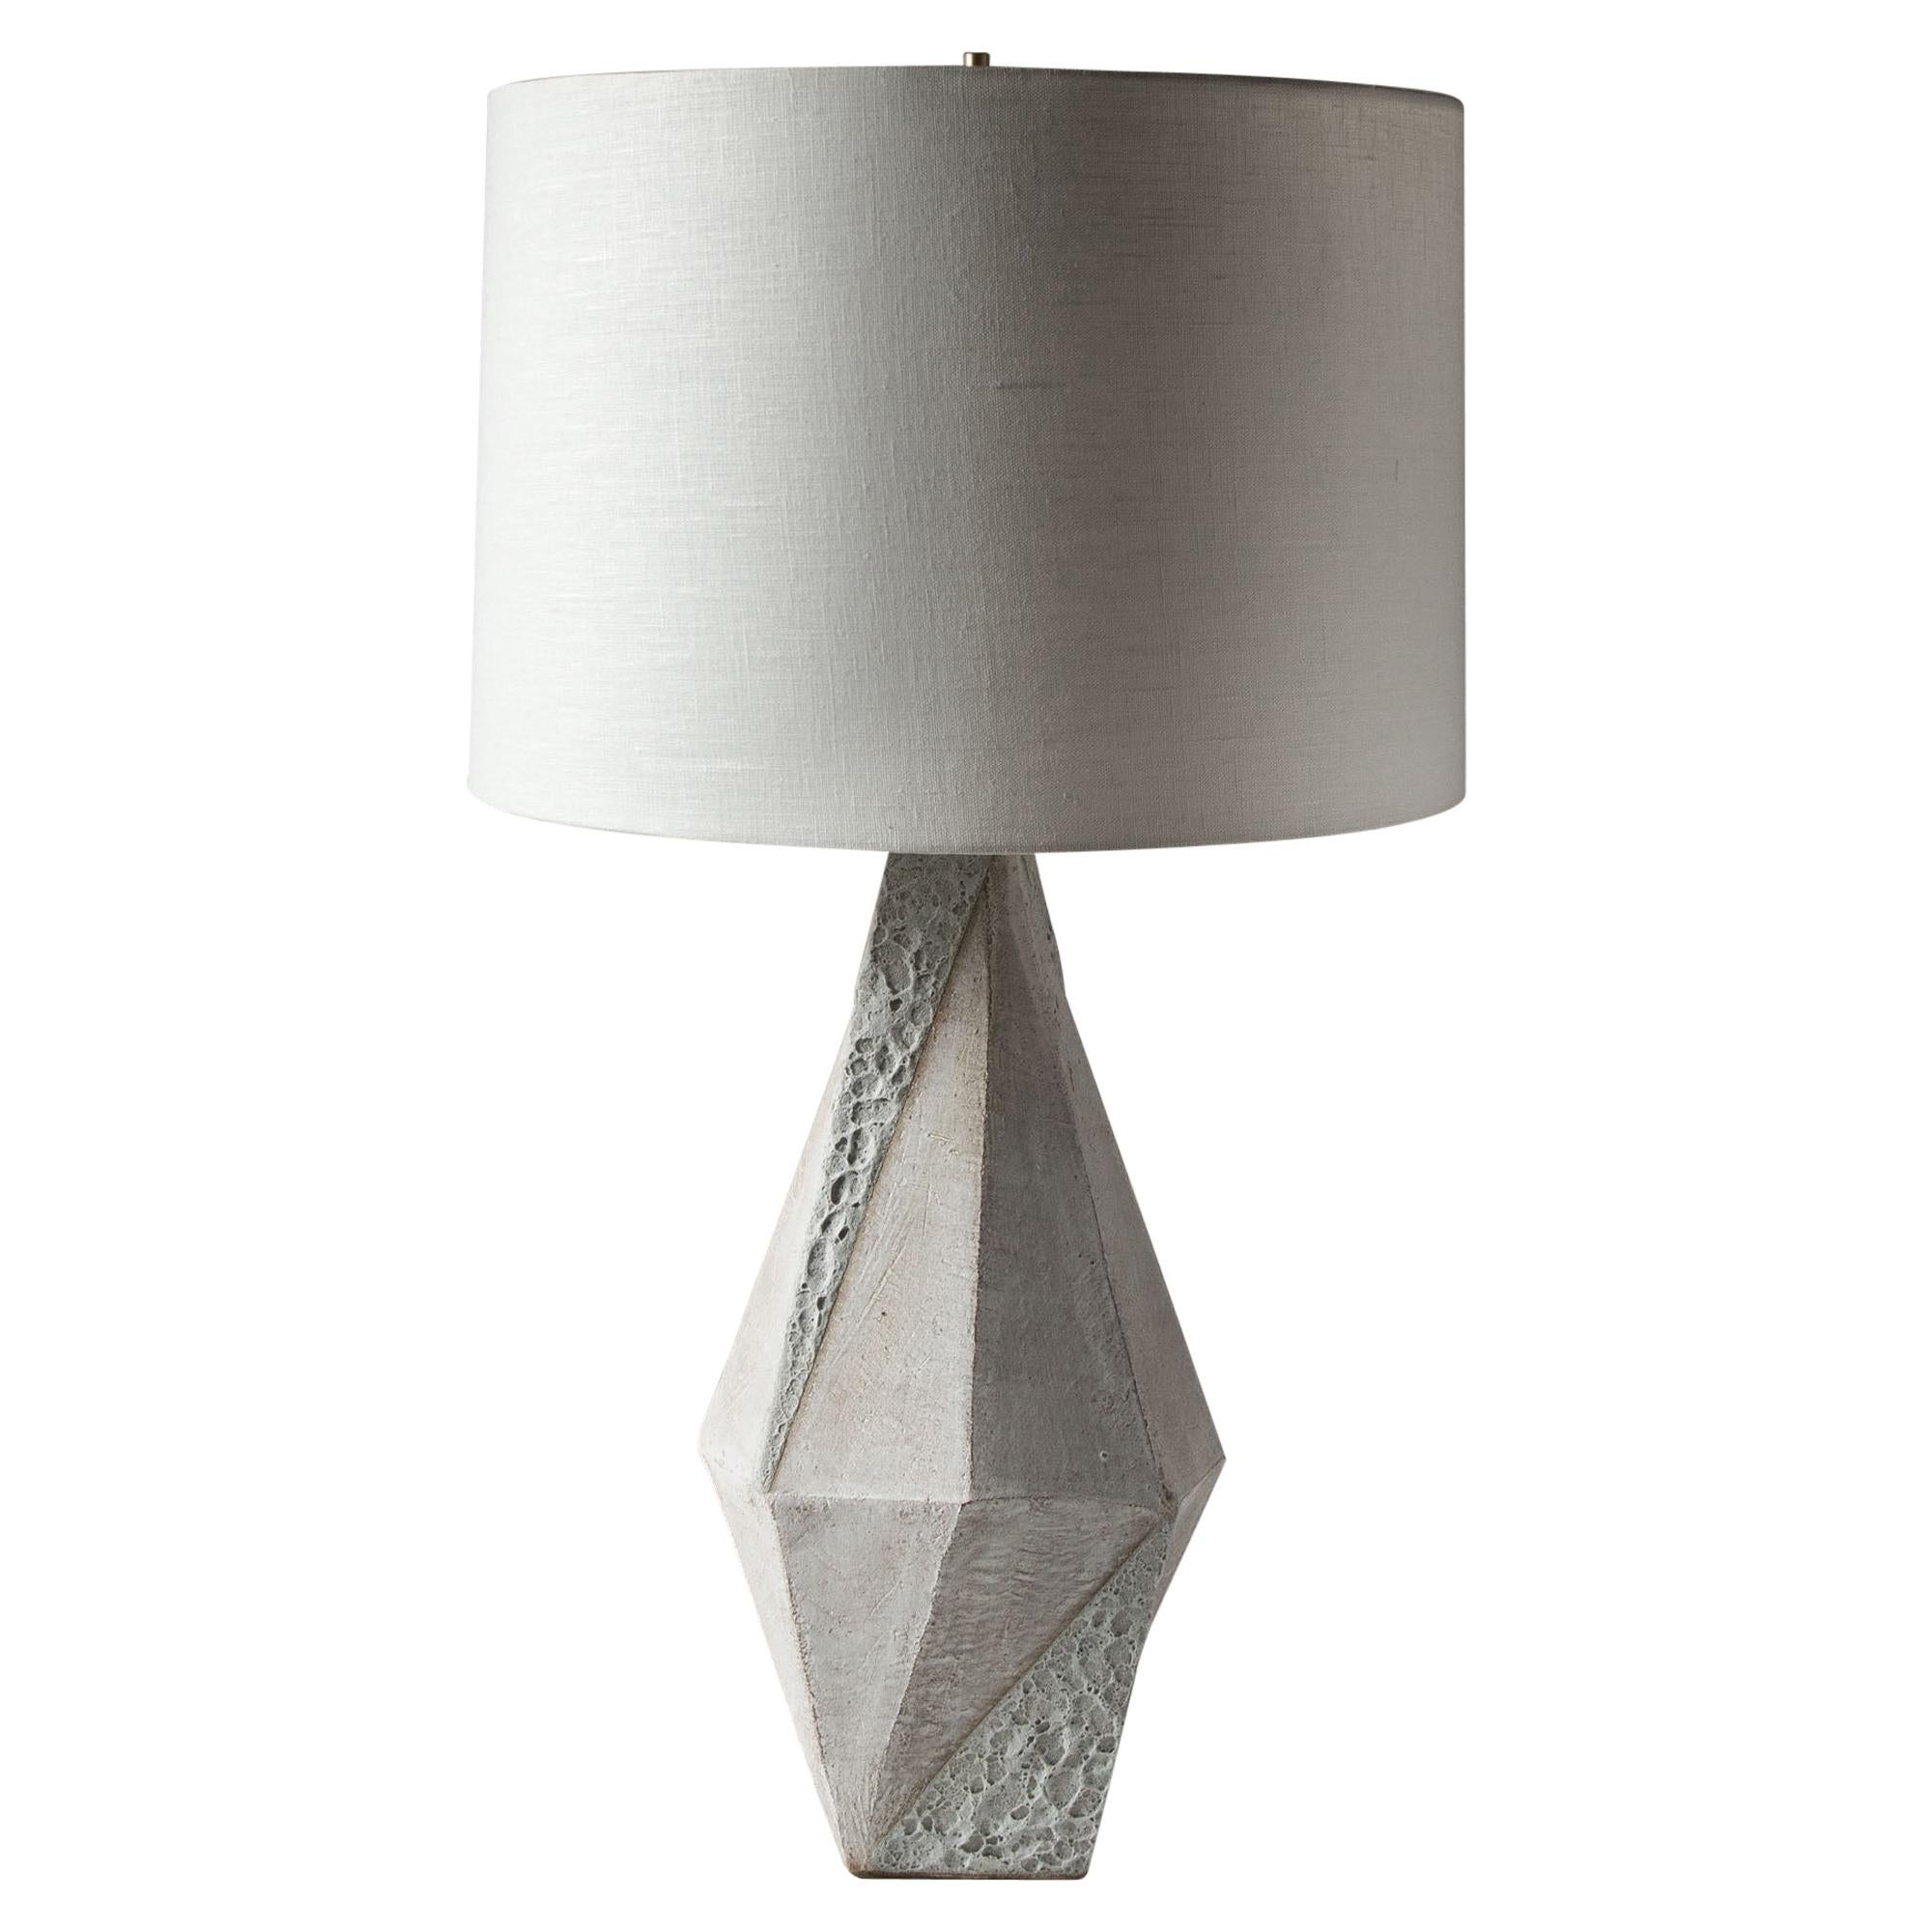 'Warp' Matte and Textured White Glazed Tall Geometric Ceramic Table Lamp